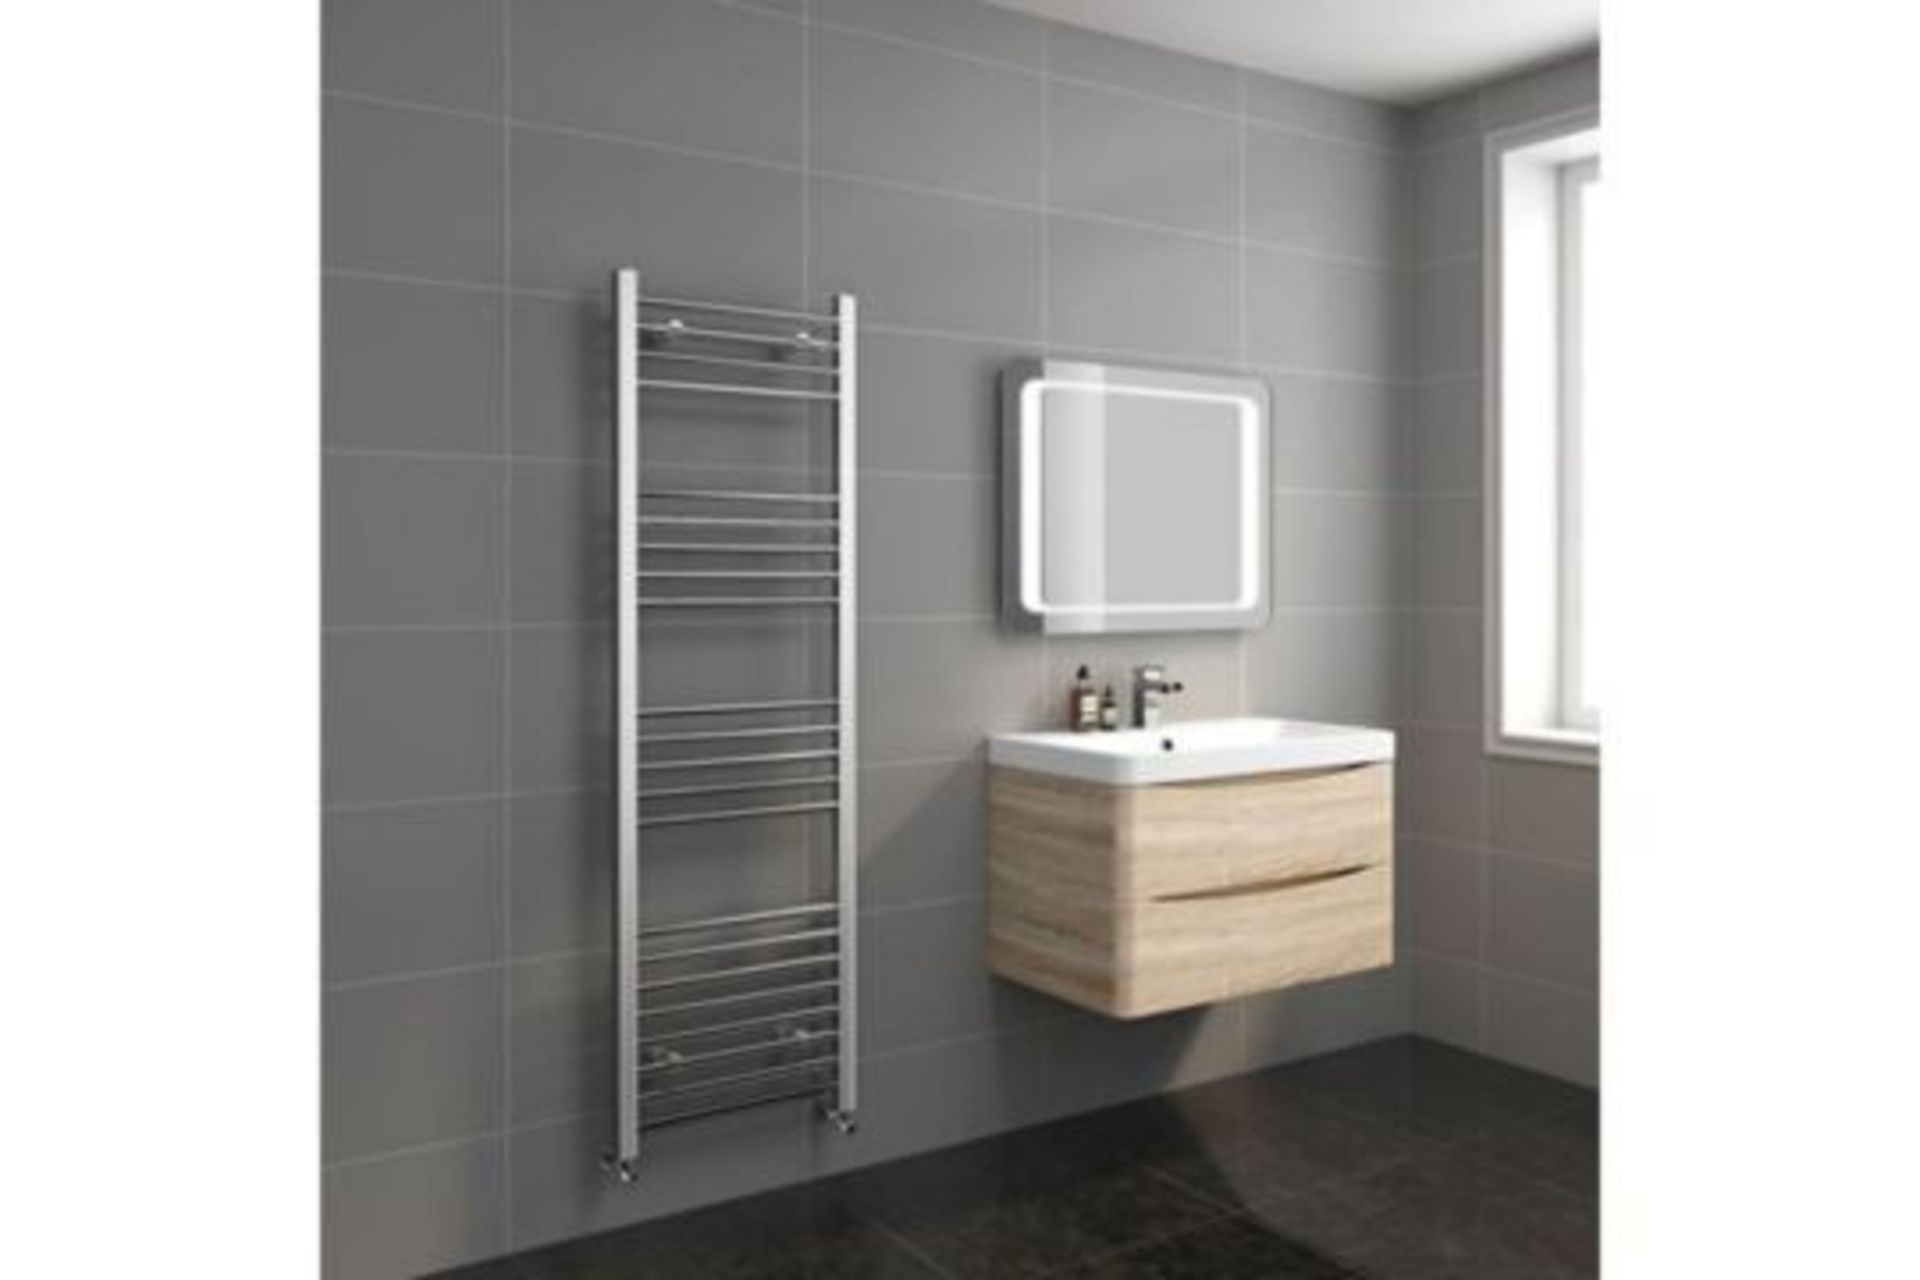 New 1600x500mm - 20mm Tubes - Chrome Flat Rail Ladder Towel Radiator.Ns1600500.Made From Chrome - Image 2 of 2